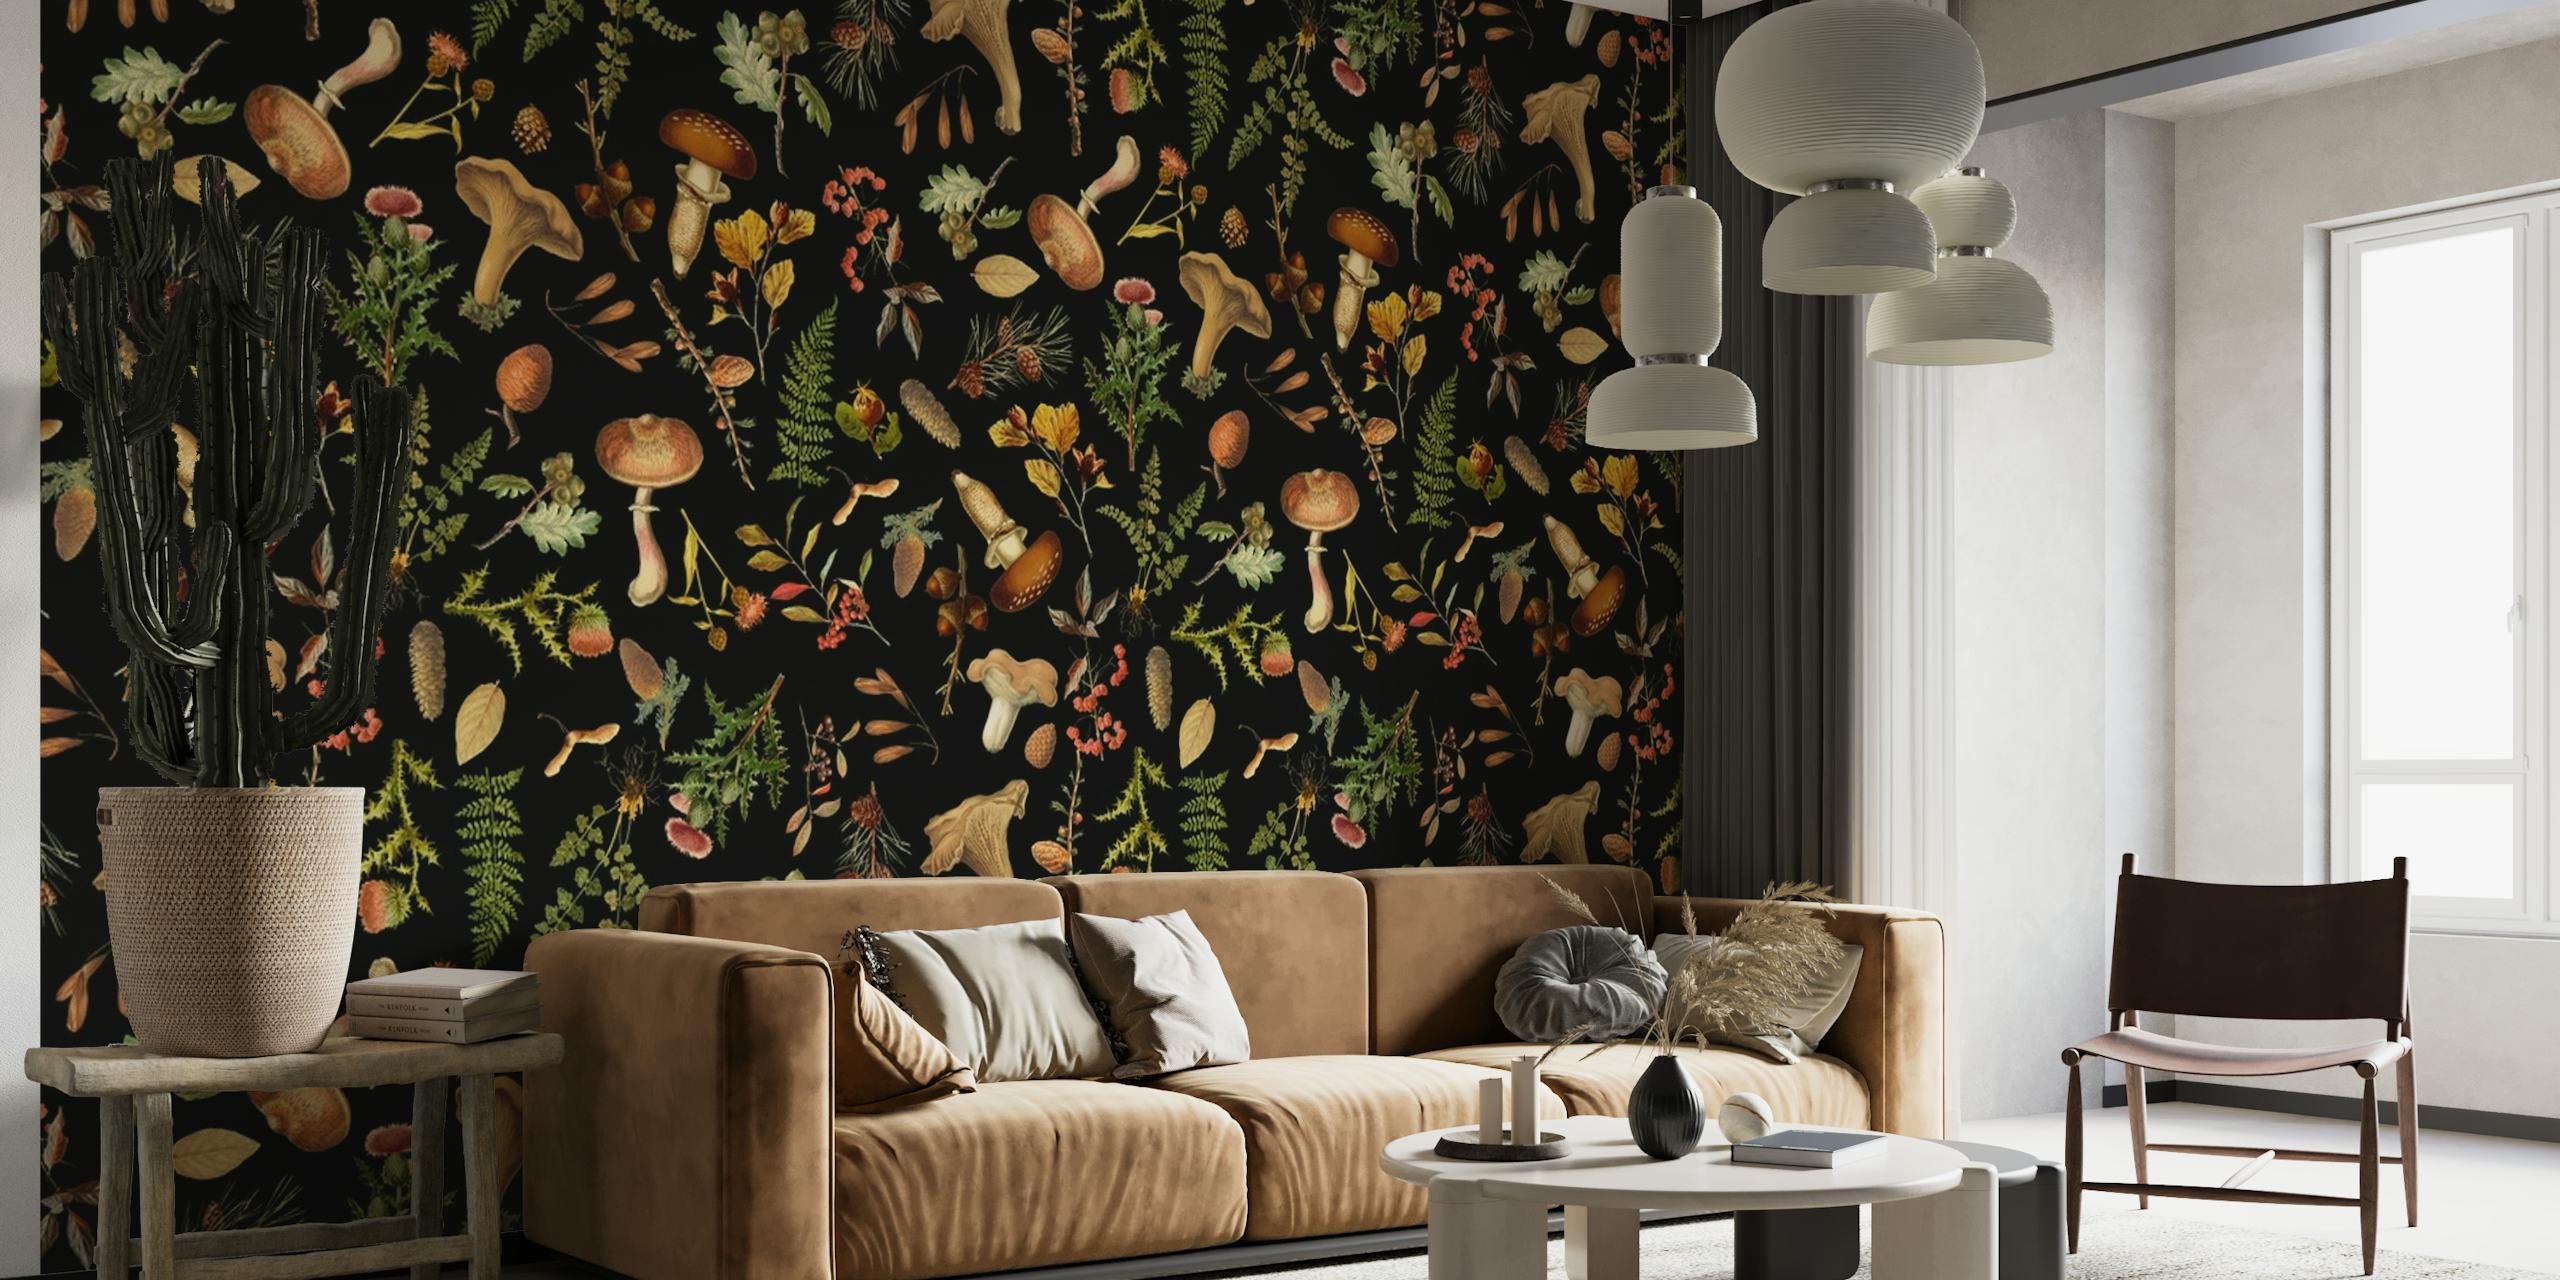 Vintage-inspired wall mural featuring an array of mushrooms set against a dark background, creating a forest-like scene.